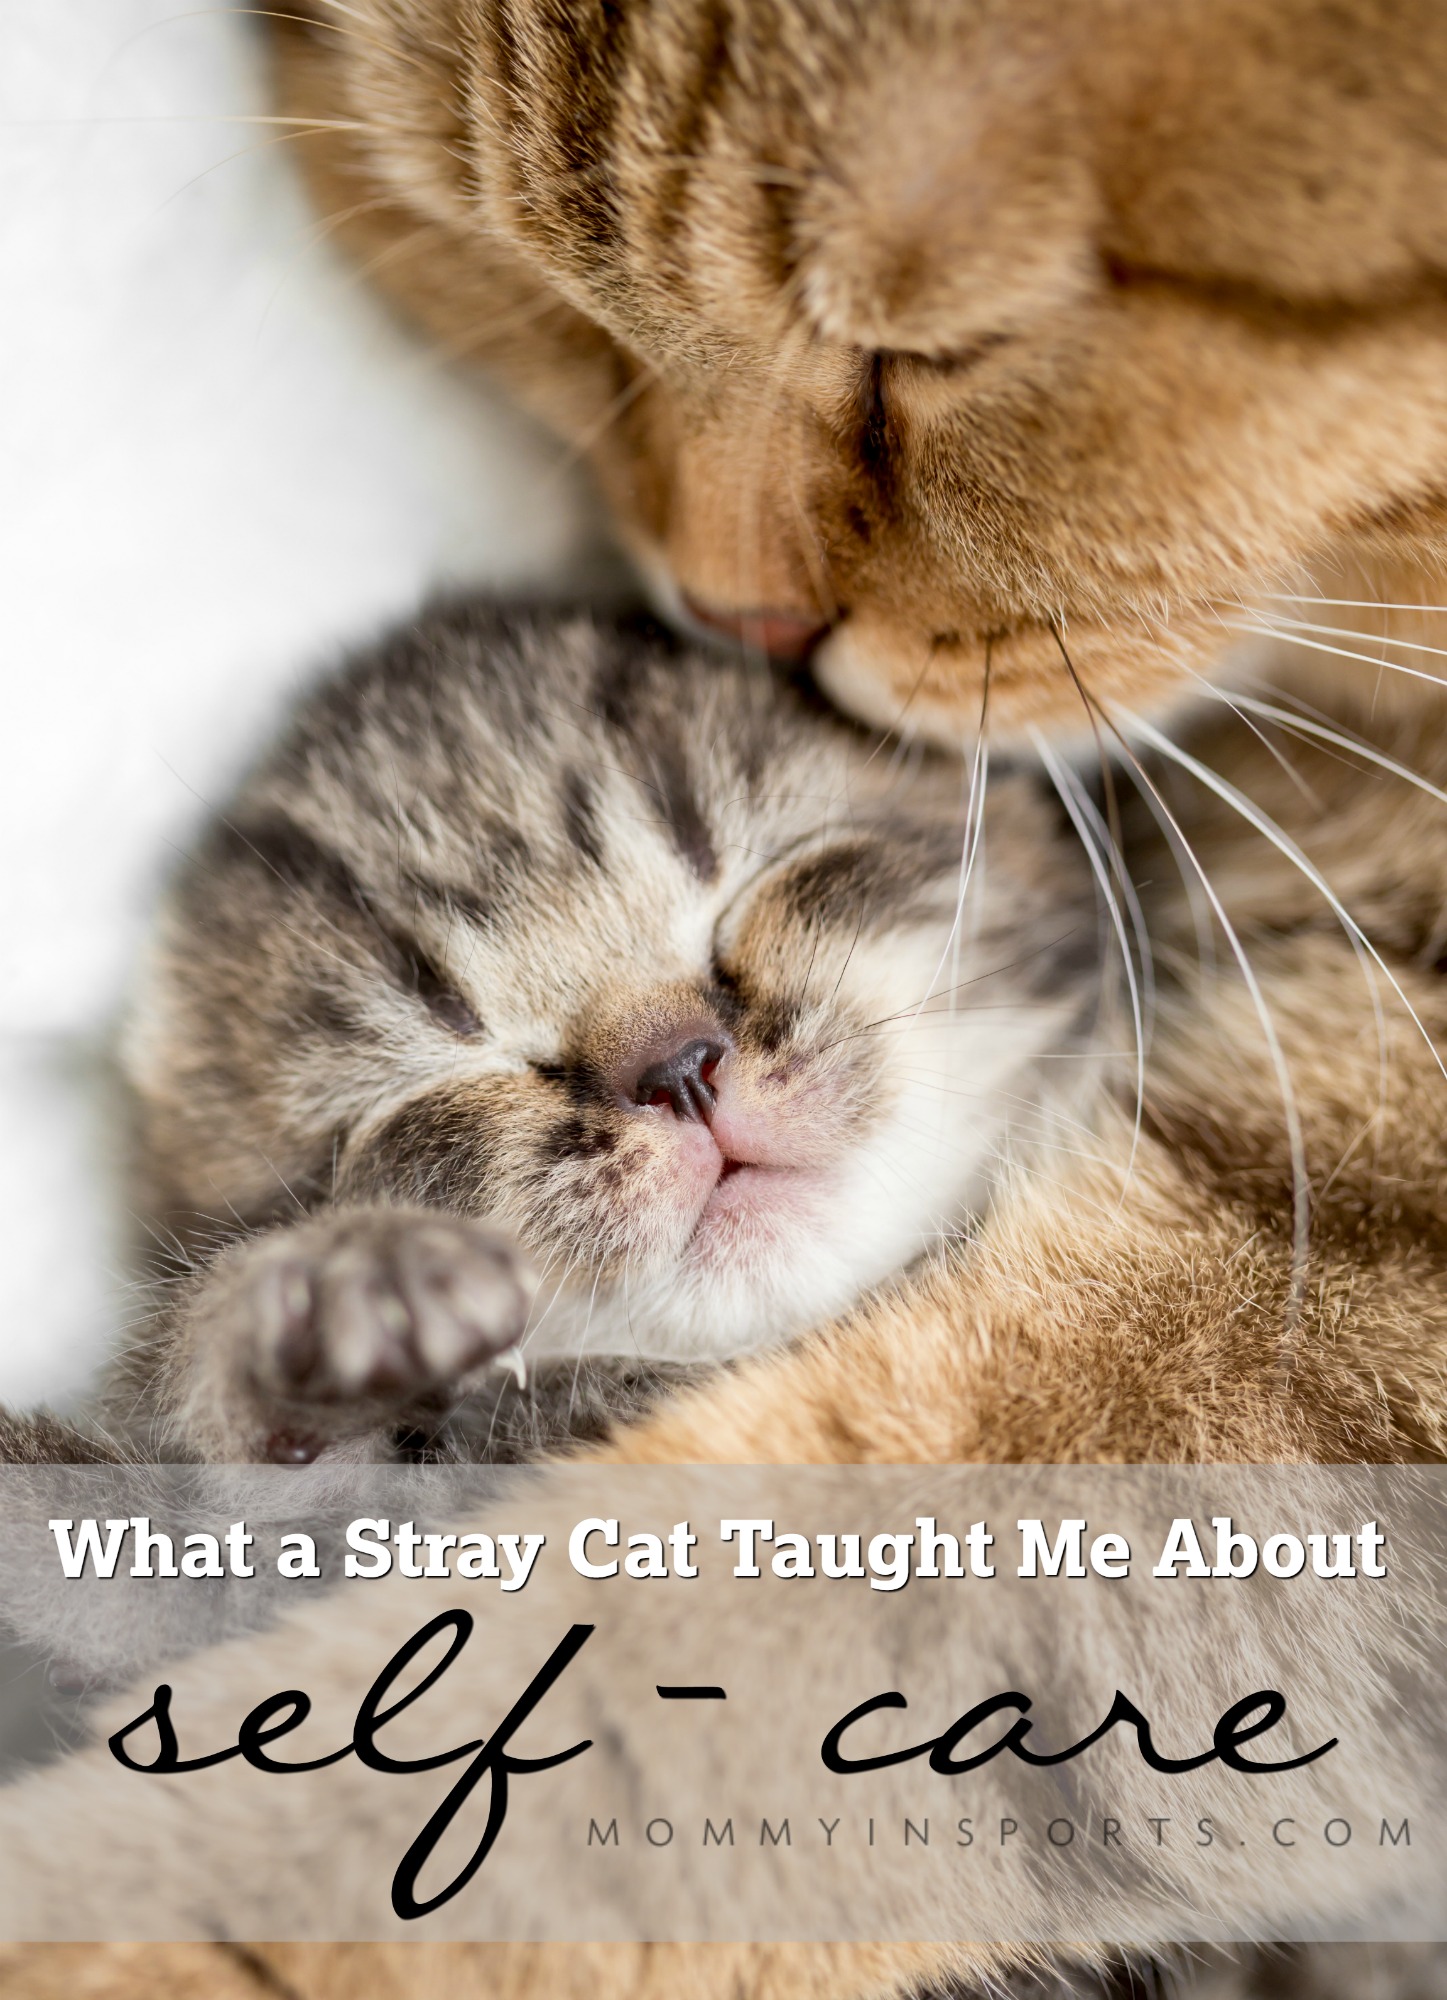 Feeling overwhelmed from motherhood. There are ways to make space in your life for YOU. Read how a stray cat helped me find time for myself, and ways YOU can too!